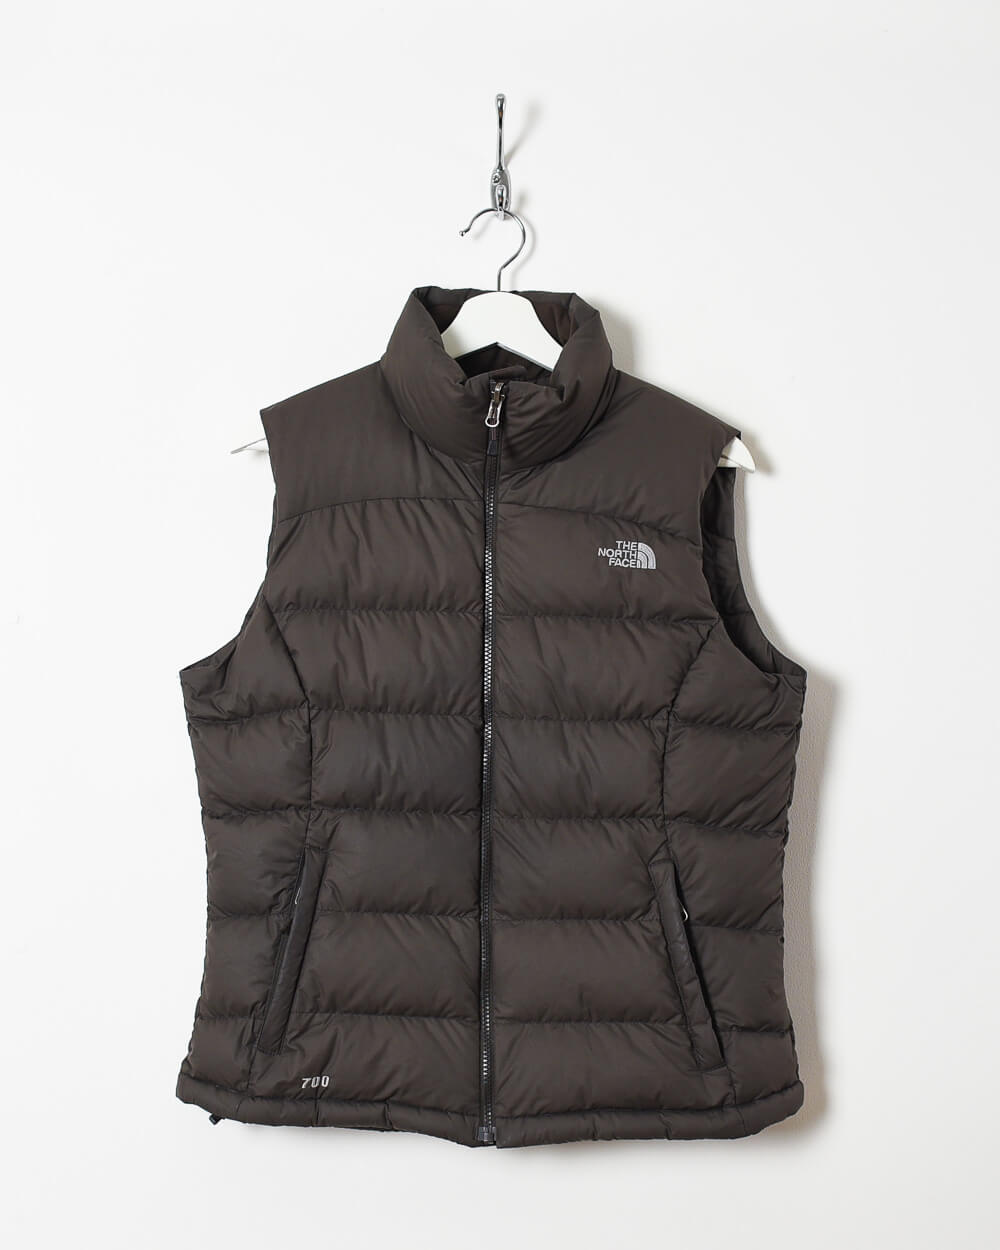 Brown The North Face Women's 700 Down Gilet - Medium